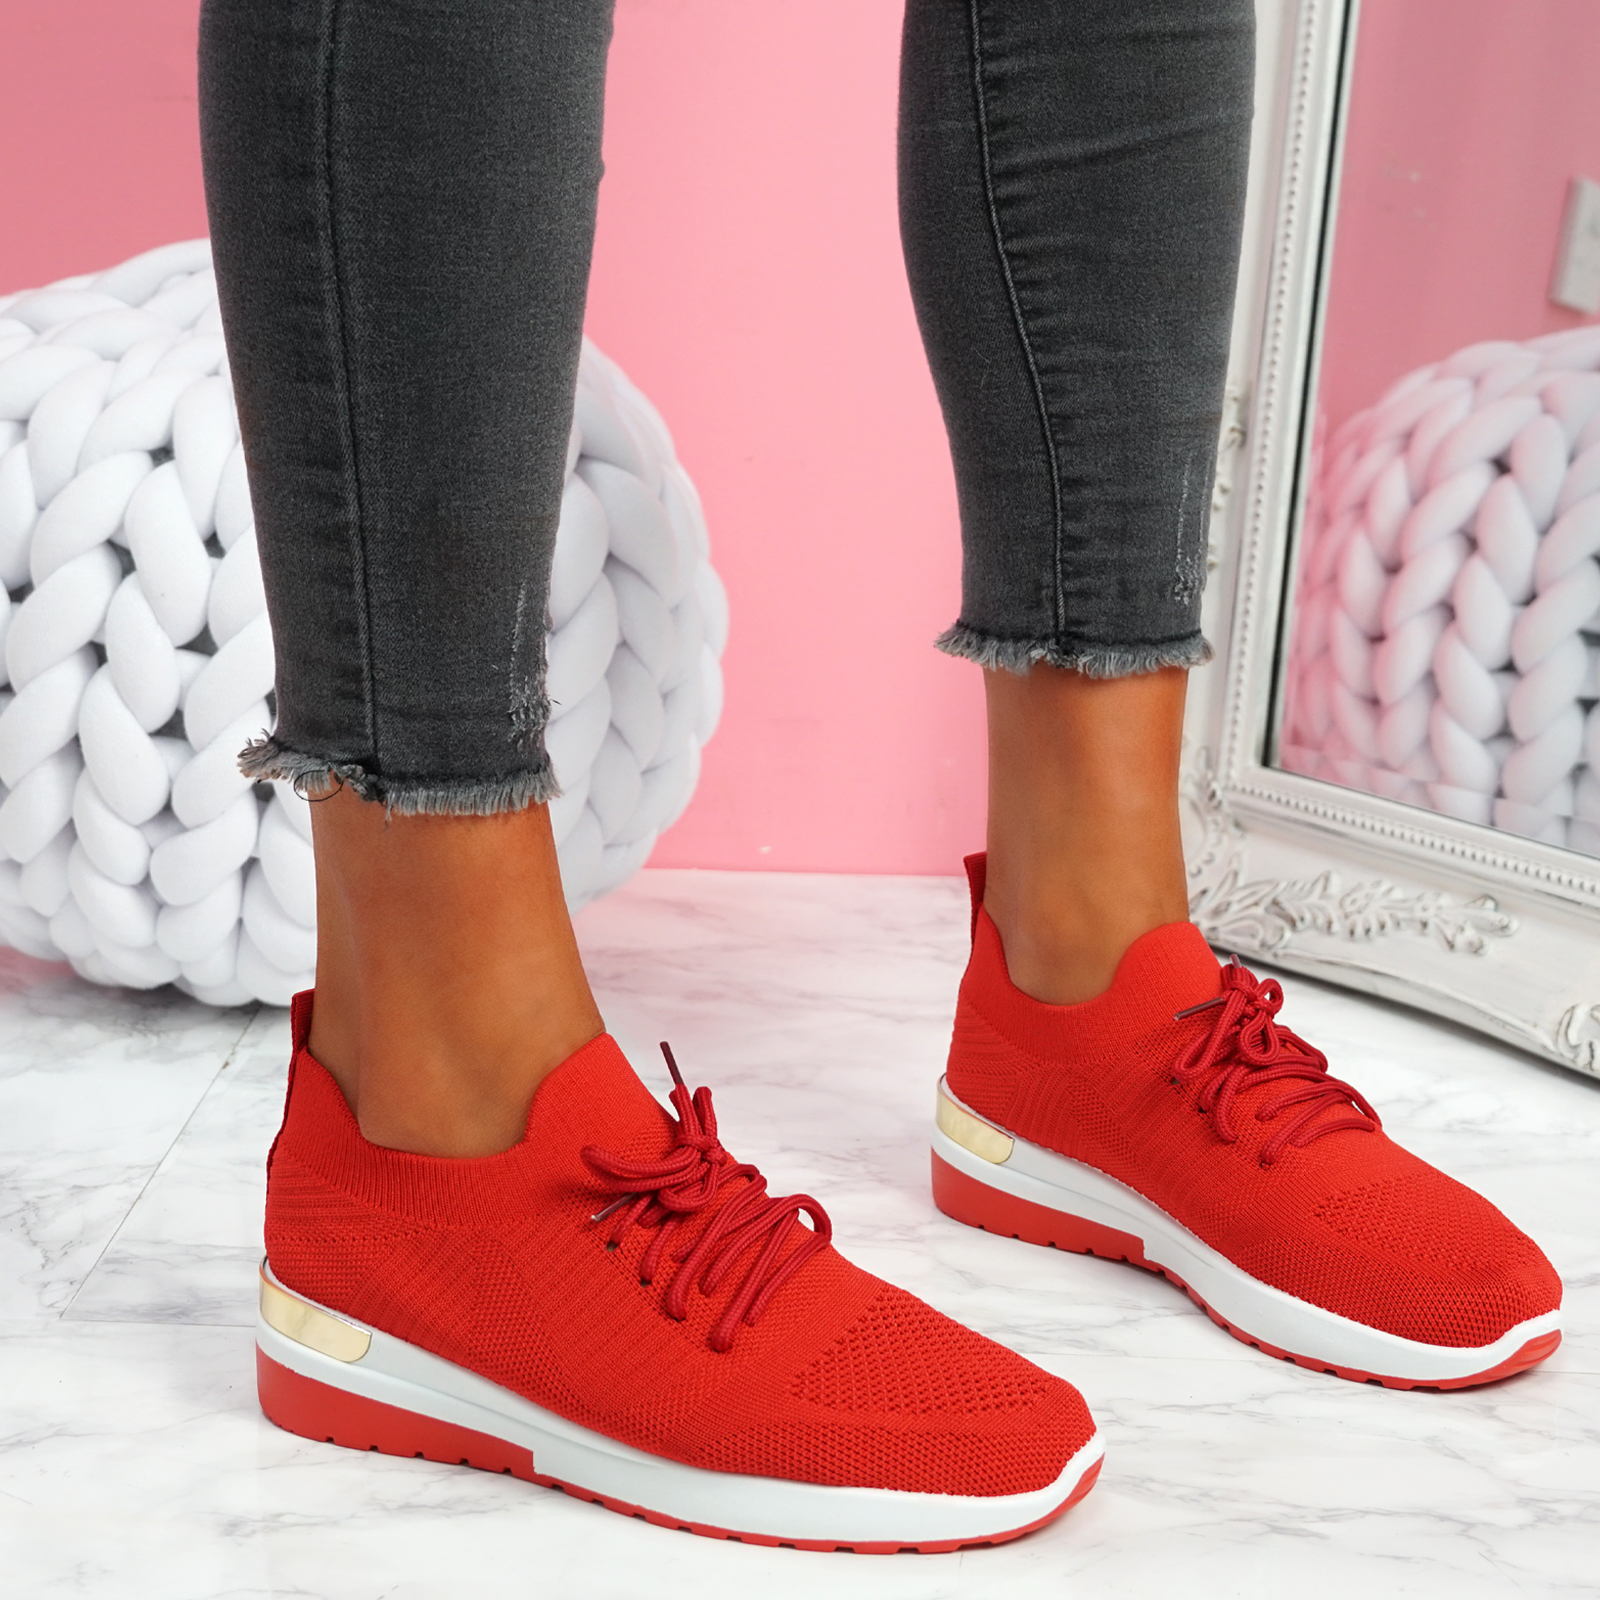 WOMENS LADIES FASHION KNIT TRAINERS LOW HEEL SNEAKERS WOMEN SHOES SIZE UK